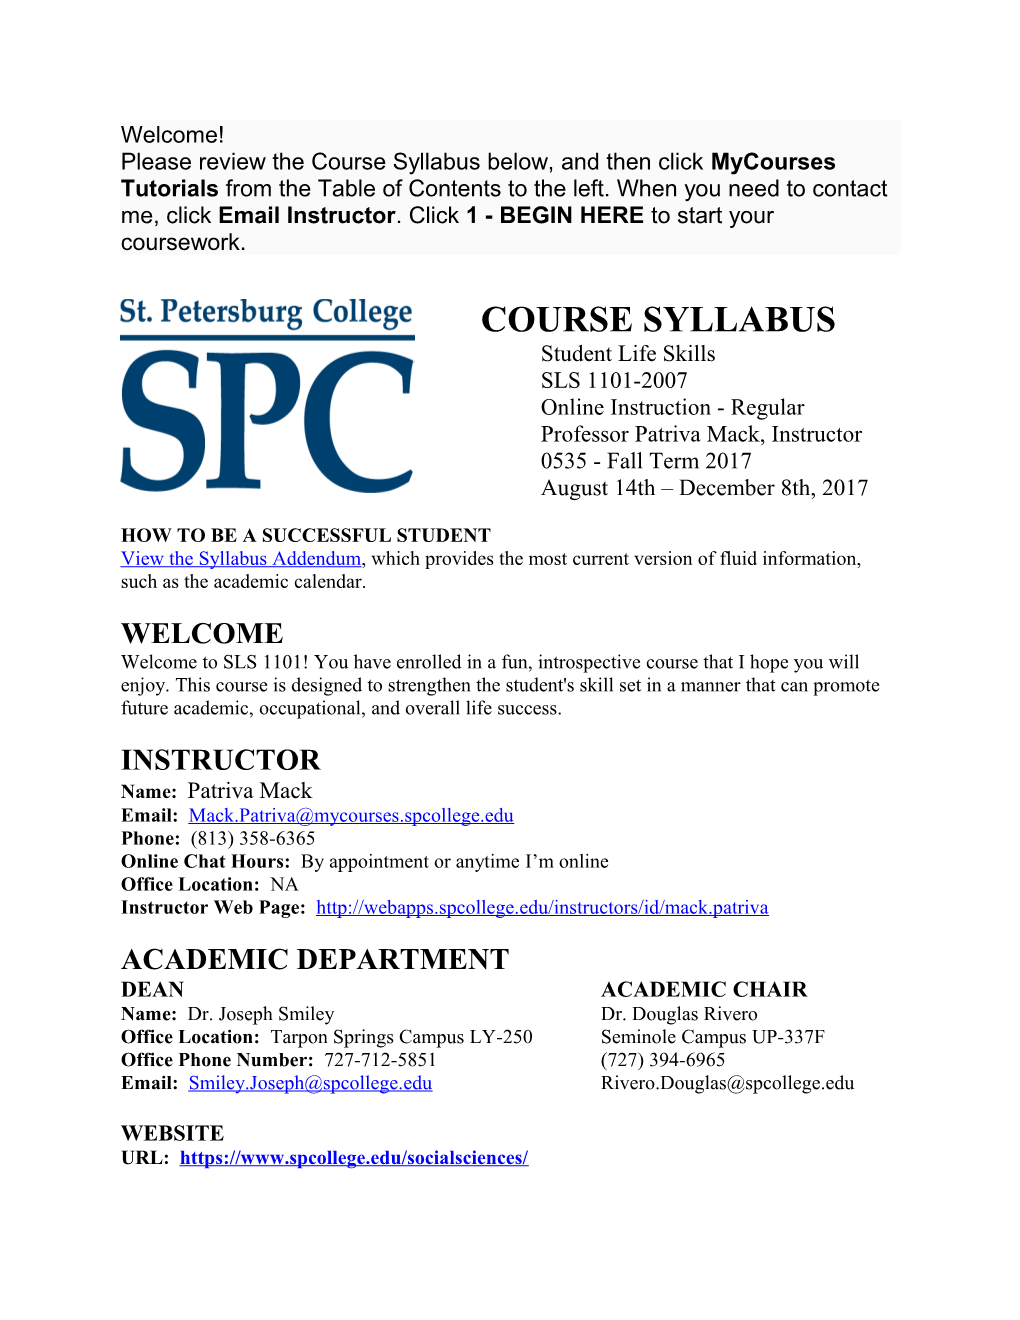 Please Review the Course Syllabus Below, and Then Click Mycourses Tutorials from the Table